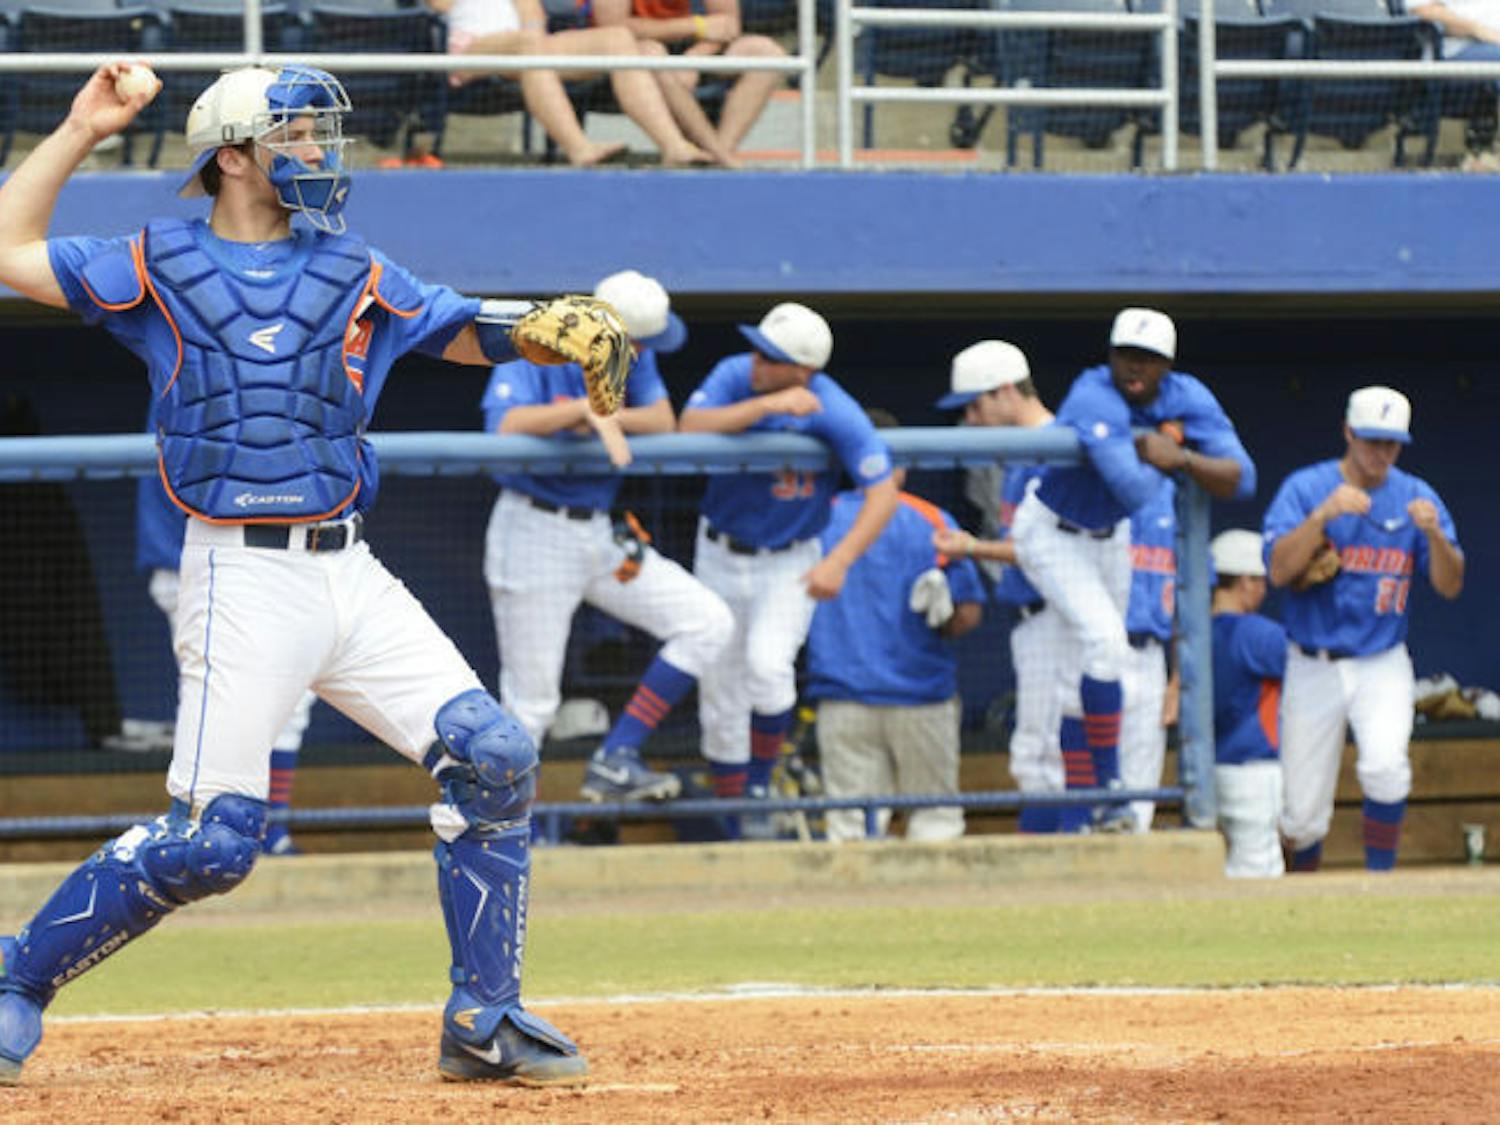 Catcher Taylor Gushue throws the ball back to the mound during warmups between innings in Florida’s 4-0 victory against Ole Miss on March 31 at McKethan Stadium.&nbsp;